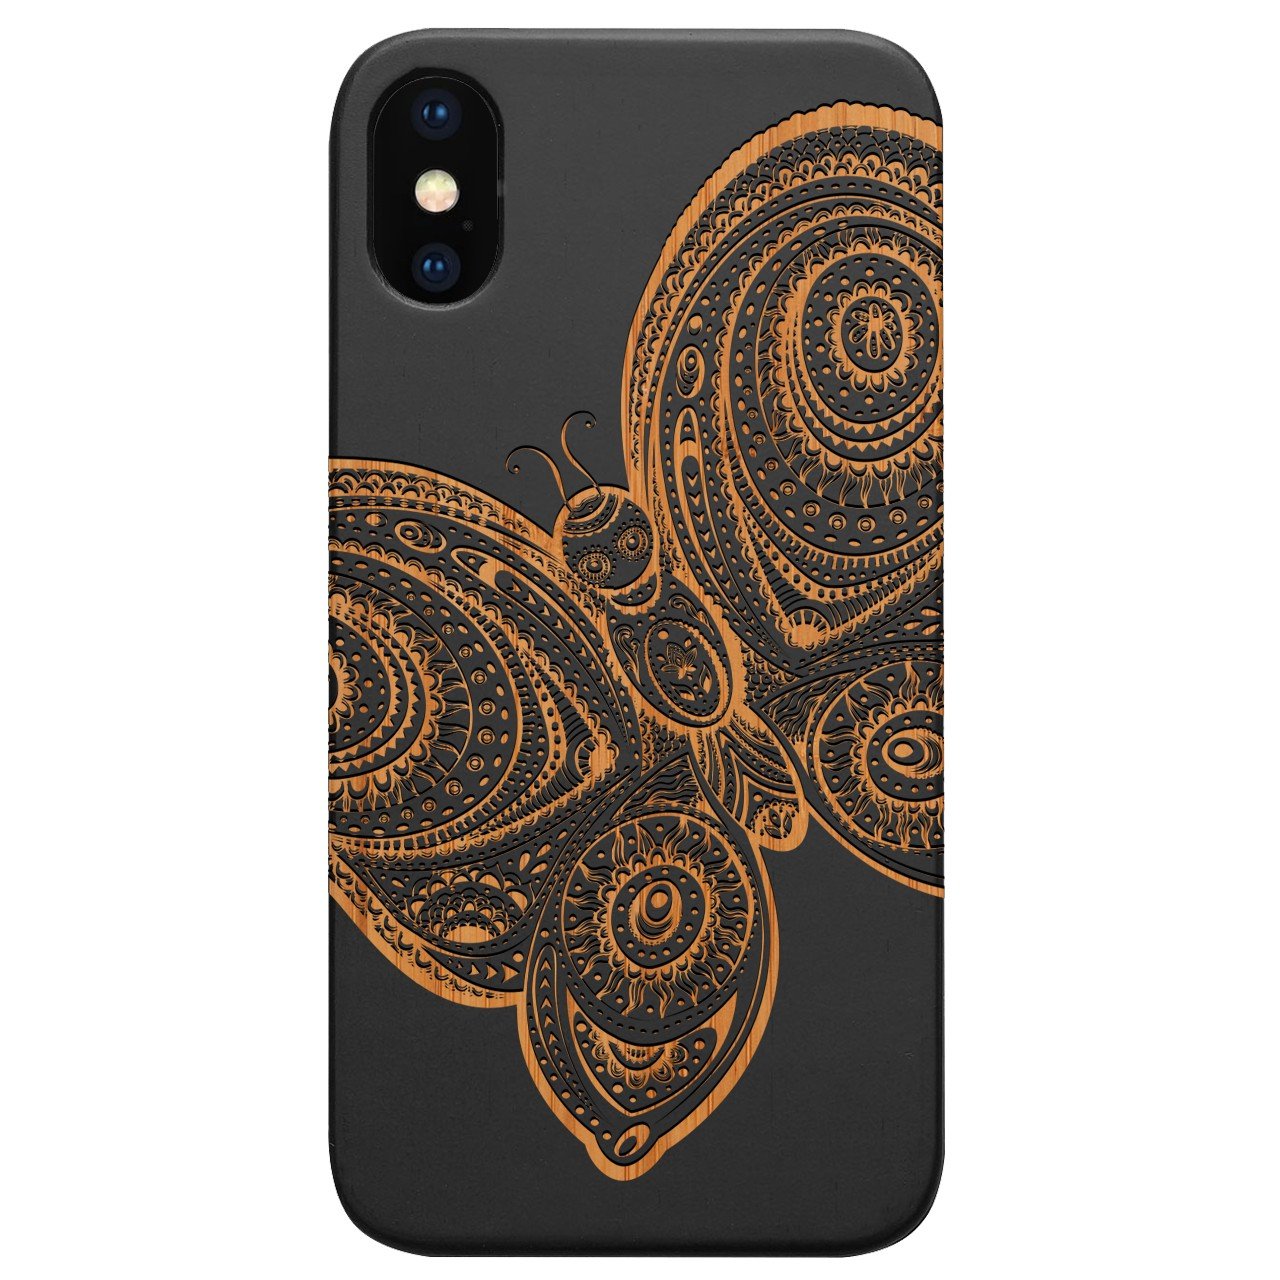 Butterfly 3 - Engraved - Wooden Phone Case